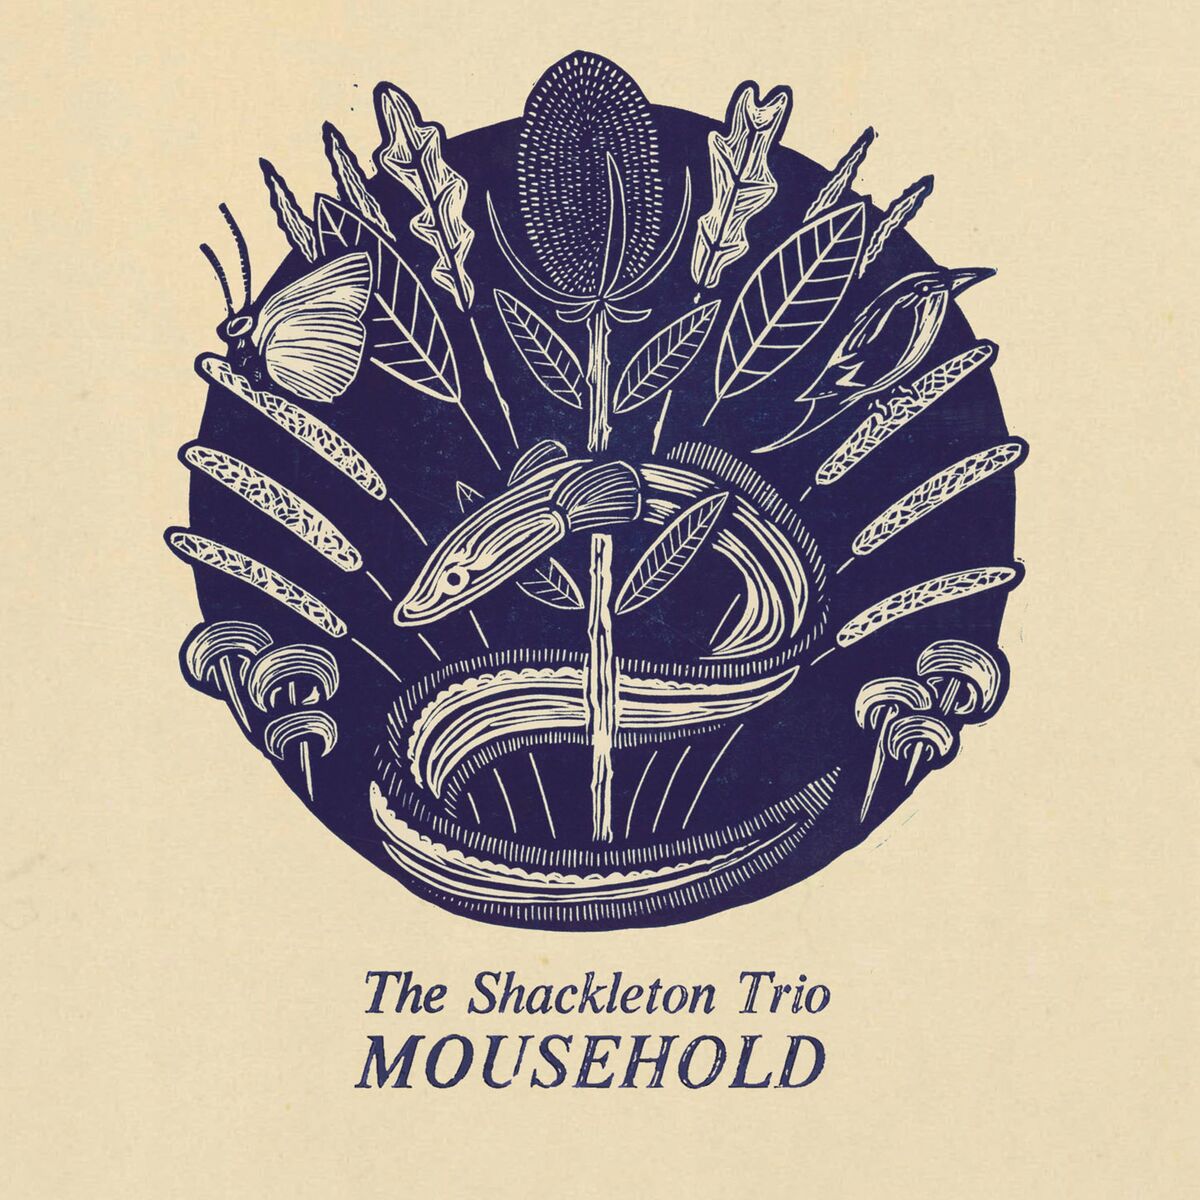 The Shackleton Trio - 2022 - Mousehold